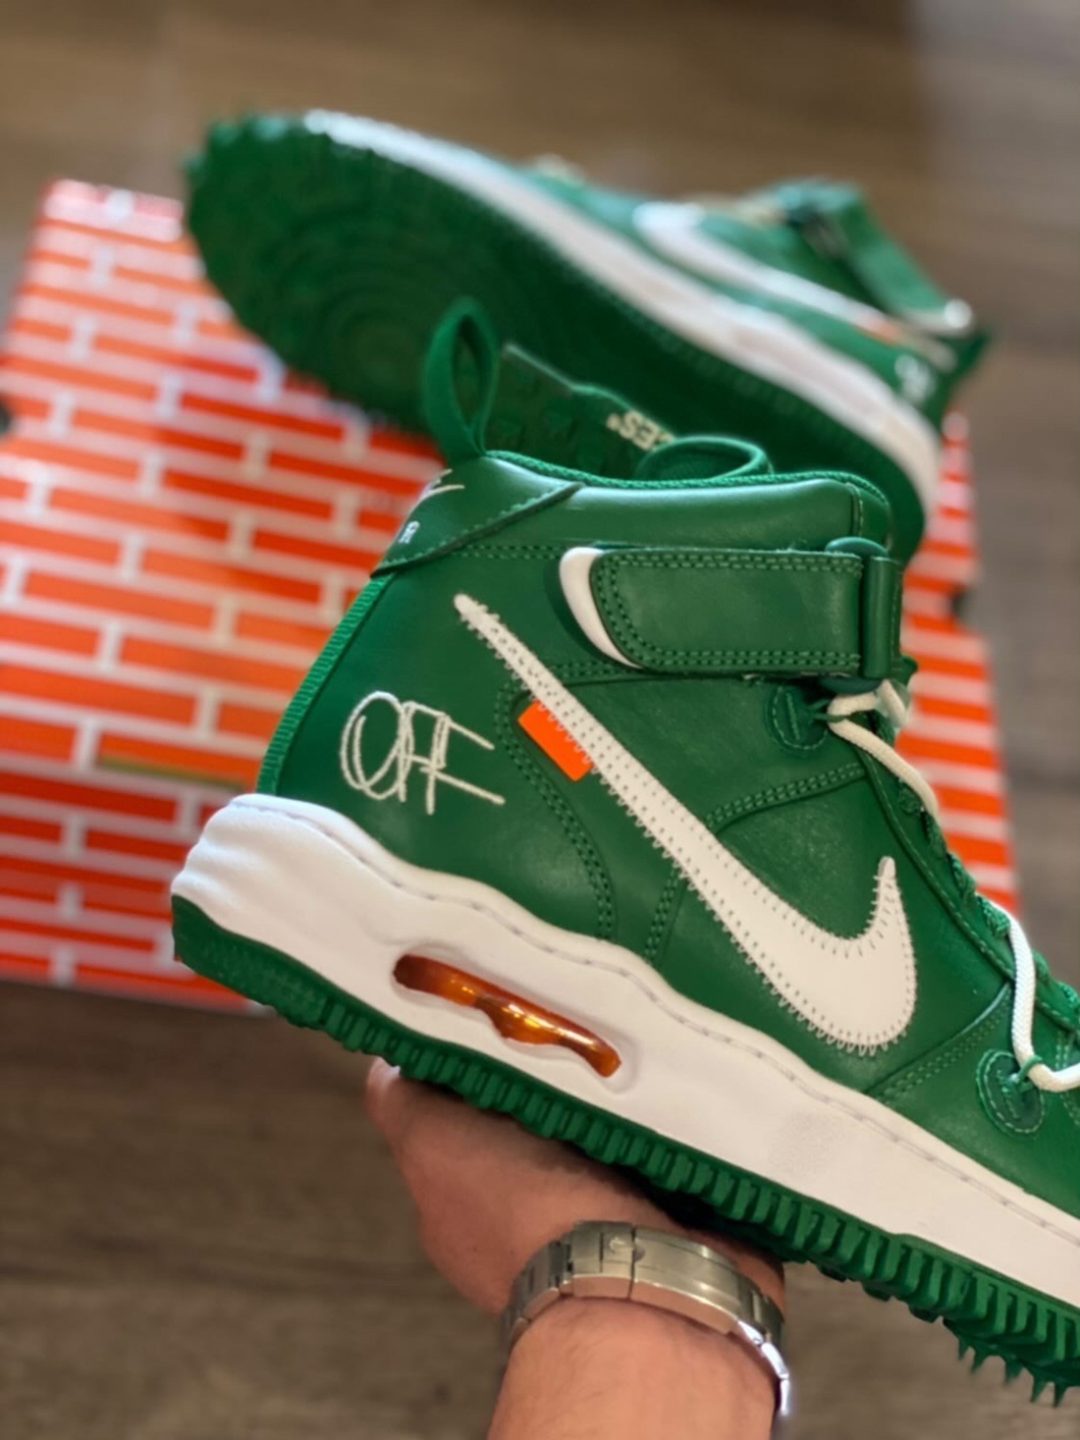 off-white-nike-air-force-1-mid-pine-green-dr0500-300-release-20230428